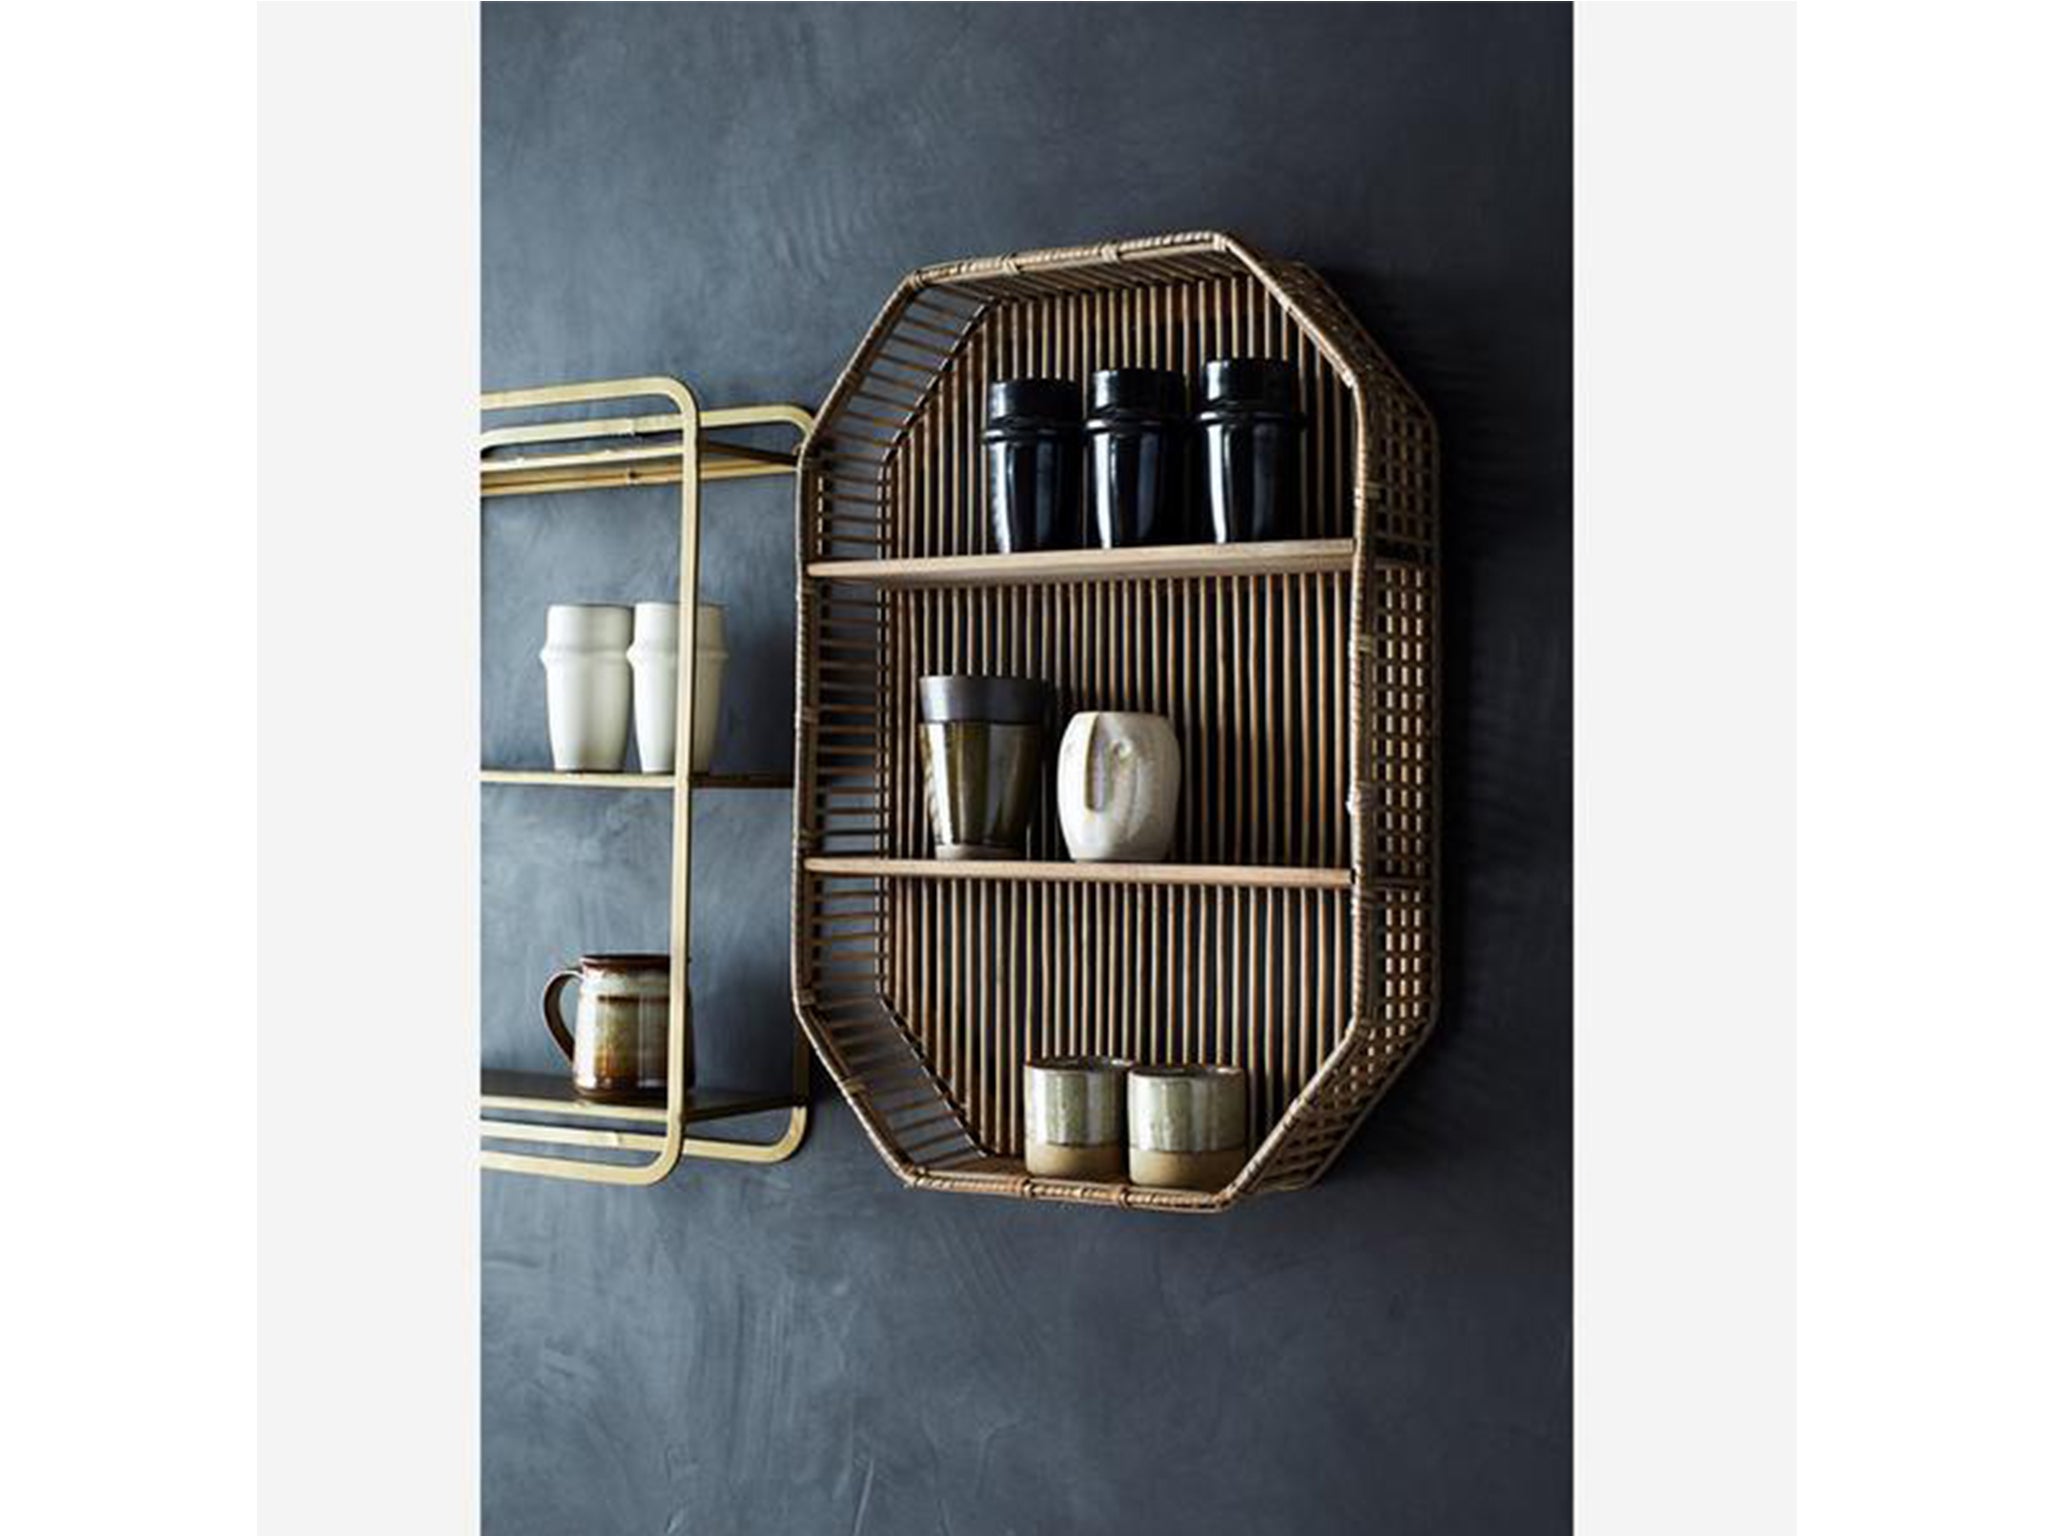 Keep your space free from clutter with this stylish shelf